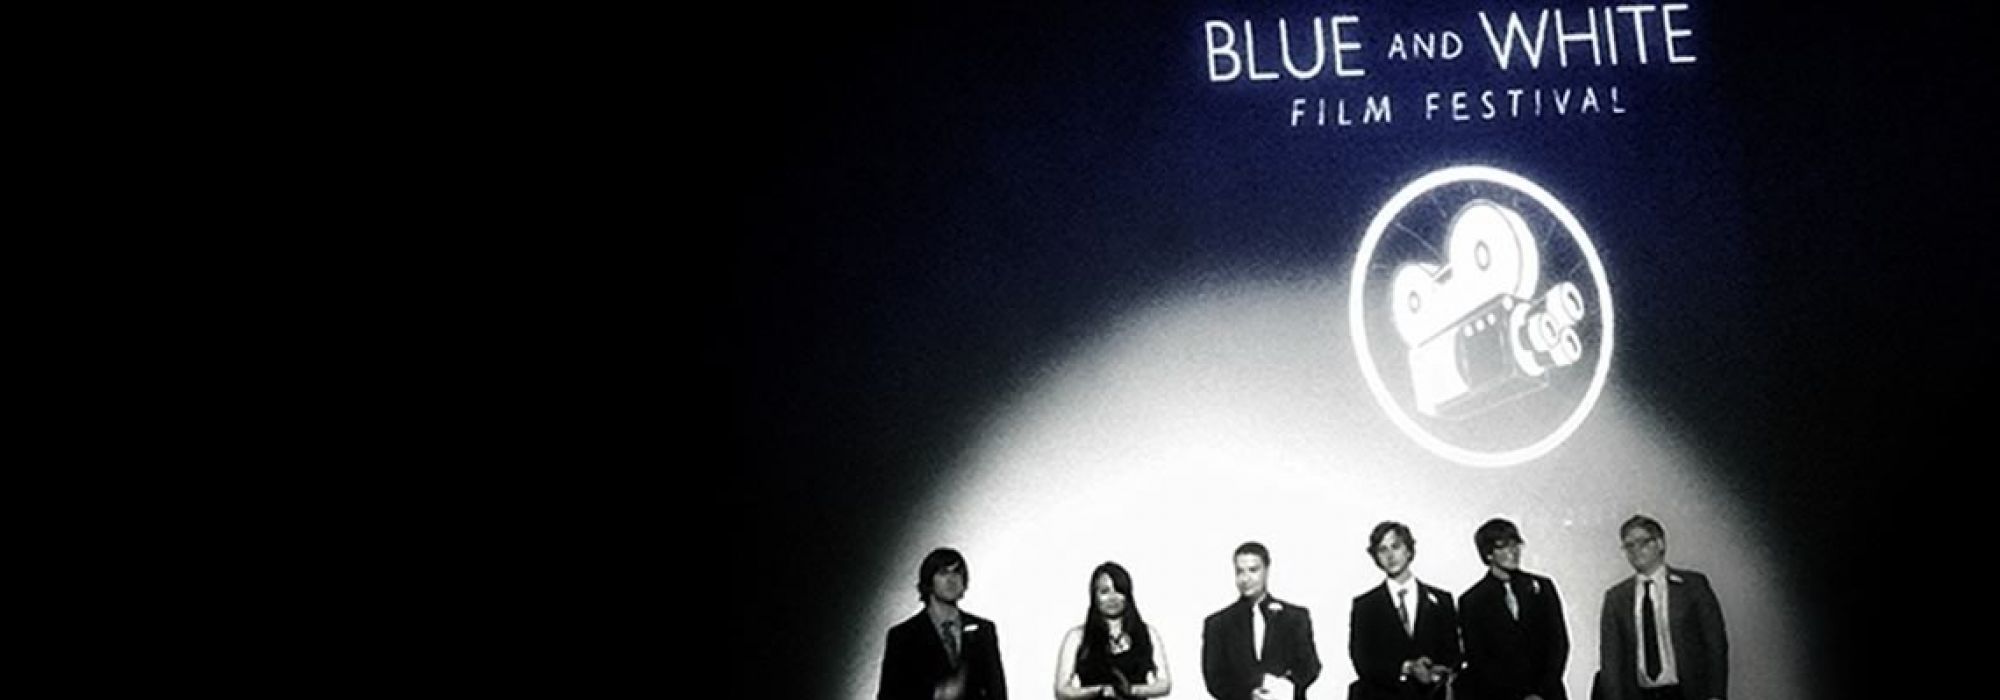 Six students stand on stage during presentations at the Blue and White Film Festival.